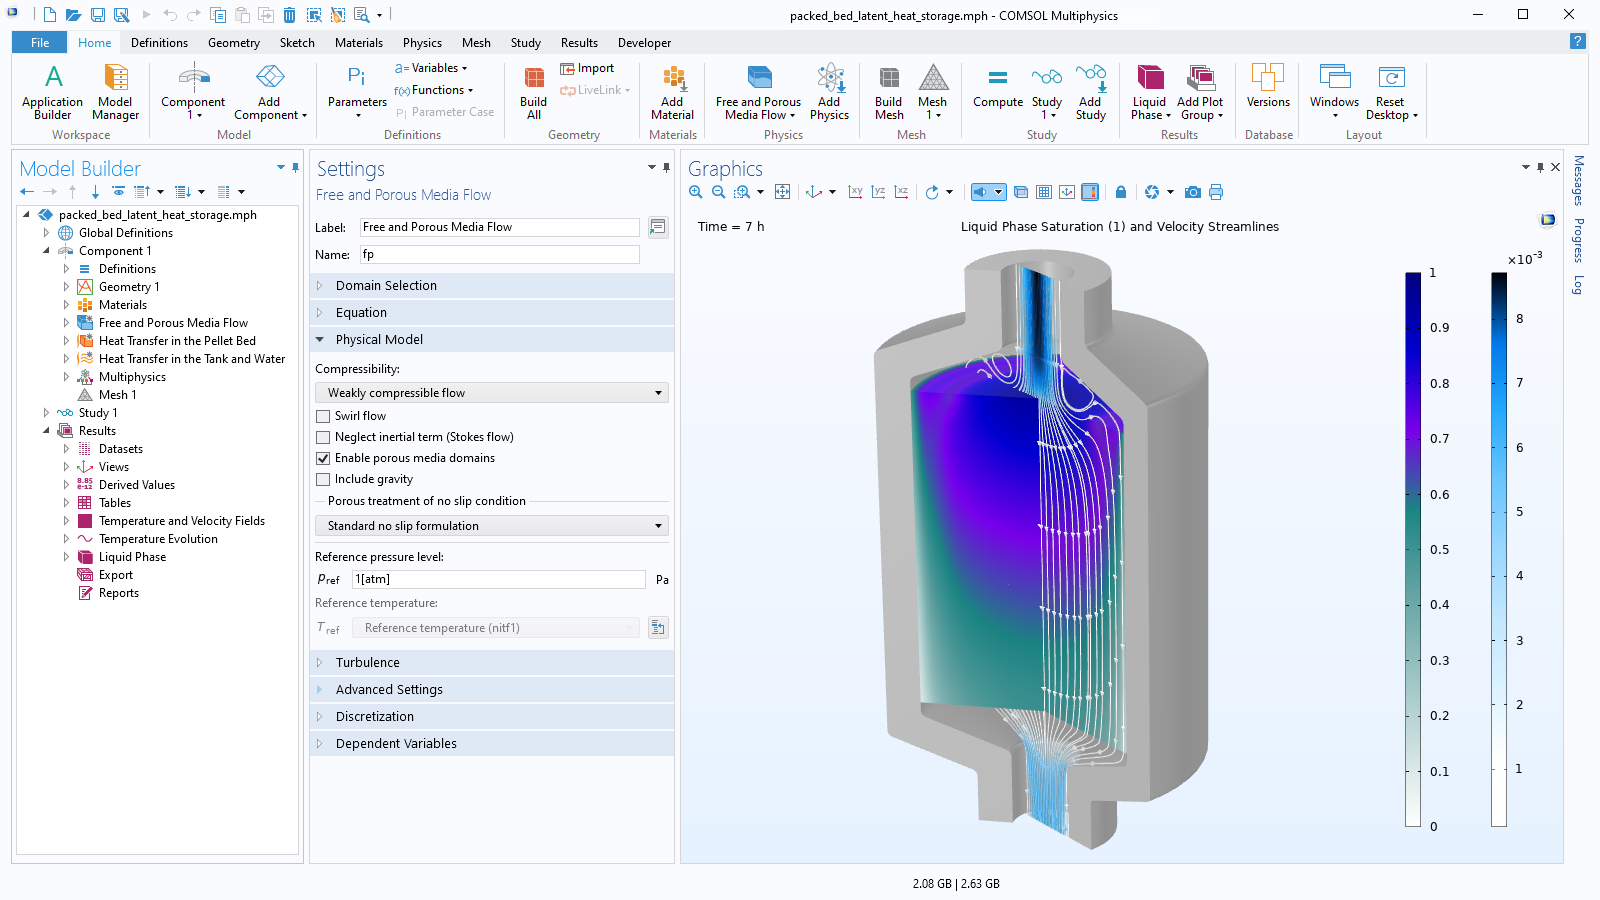 The COMSOL Multiphysics UI showing the Model Builder, the Settings window for the Free and Porous Media Flow interface, and a packed bed latent heat storage model in the Graphics window.